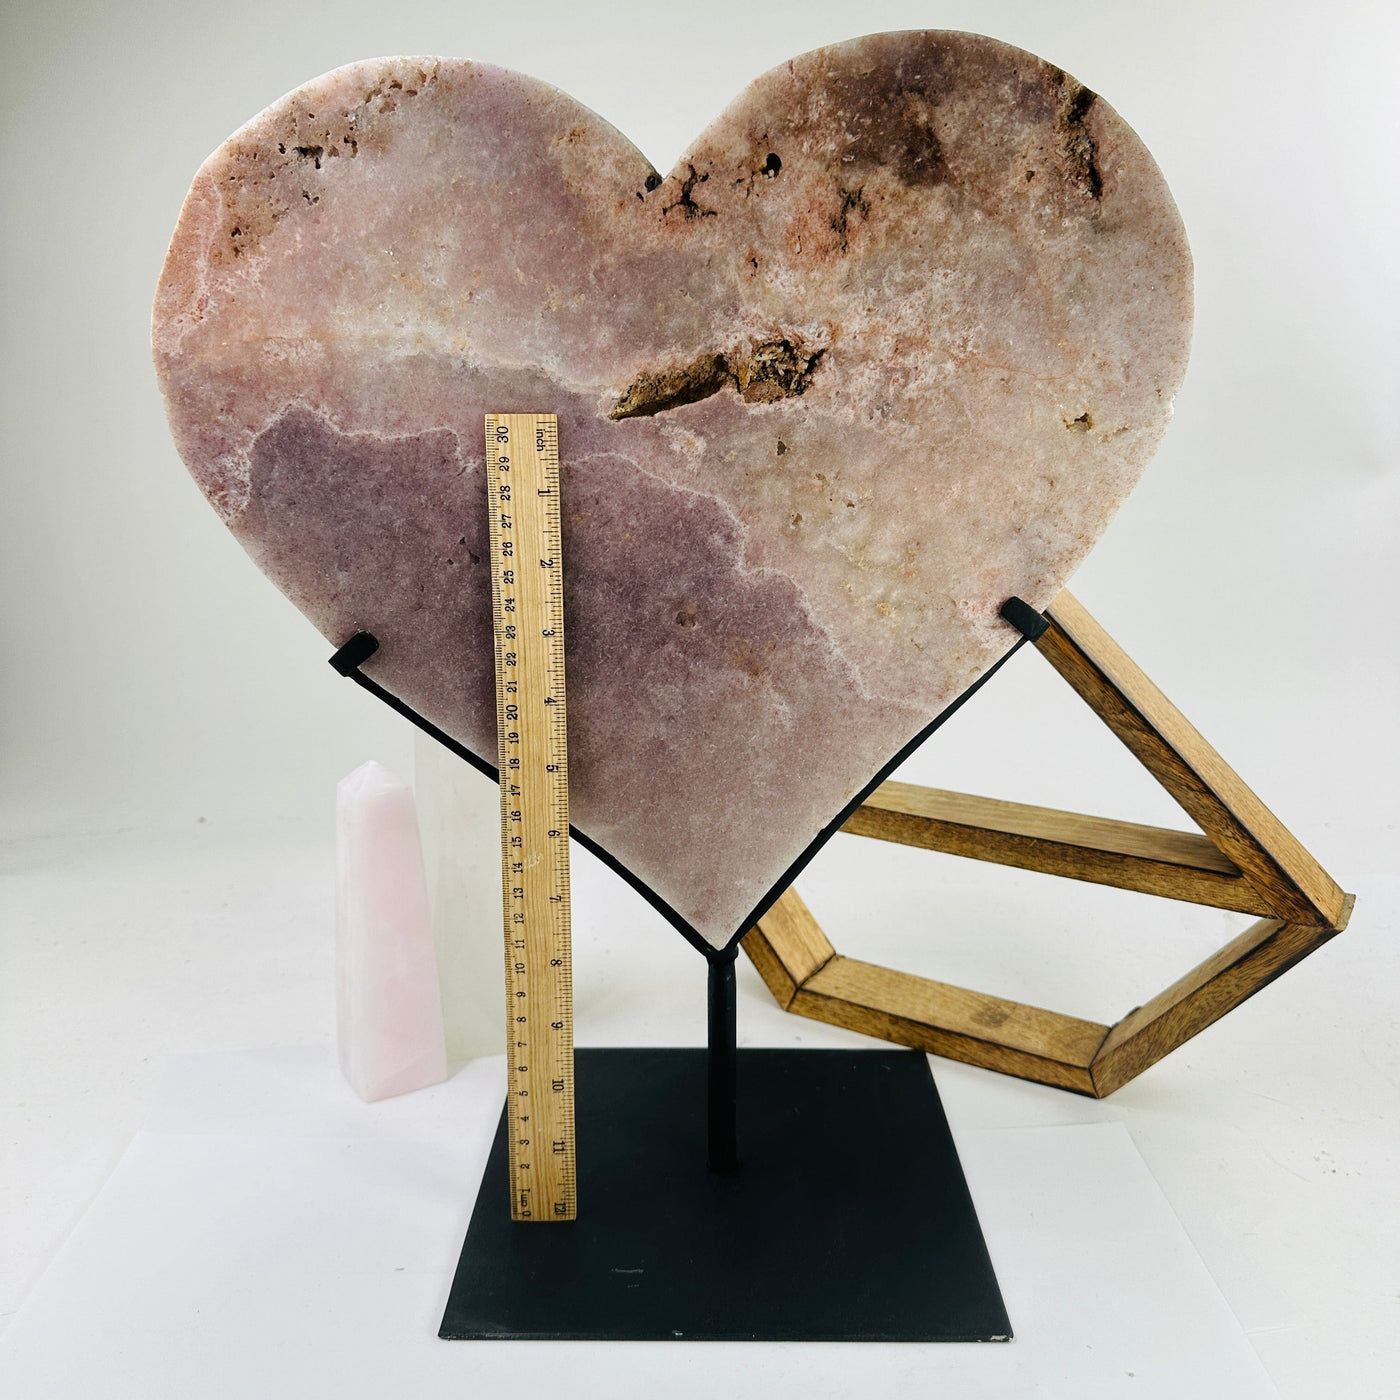 pink amethyst heart on stand next to a ruler for size reference